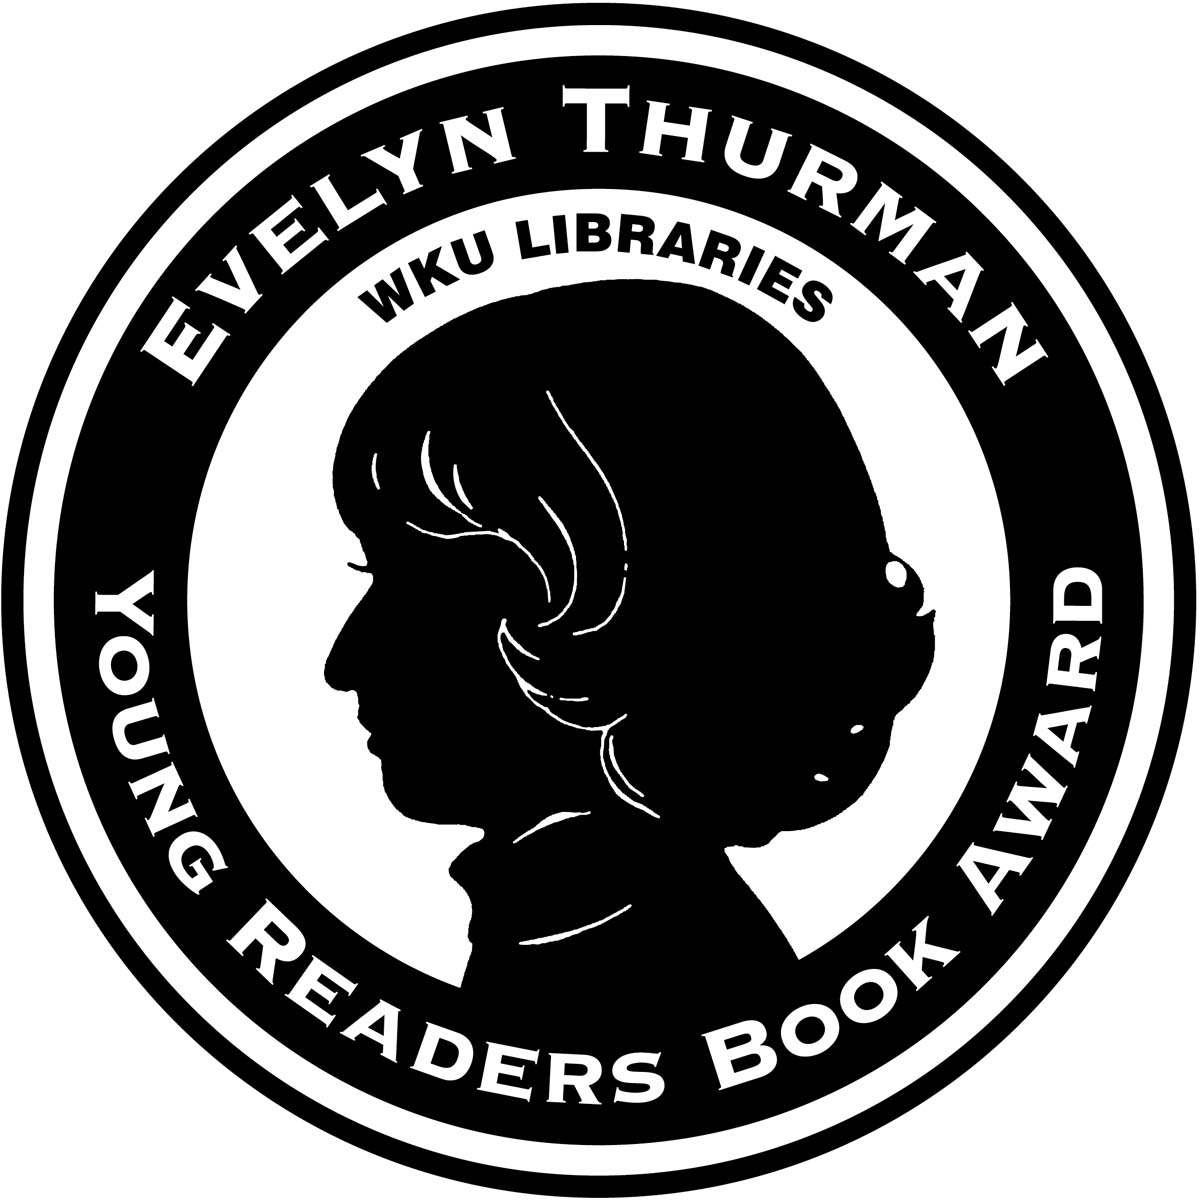 Evelyn Thurman Young Readers Book Award